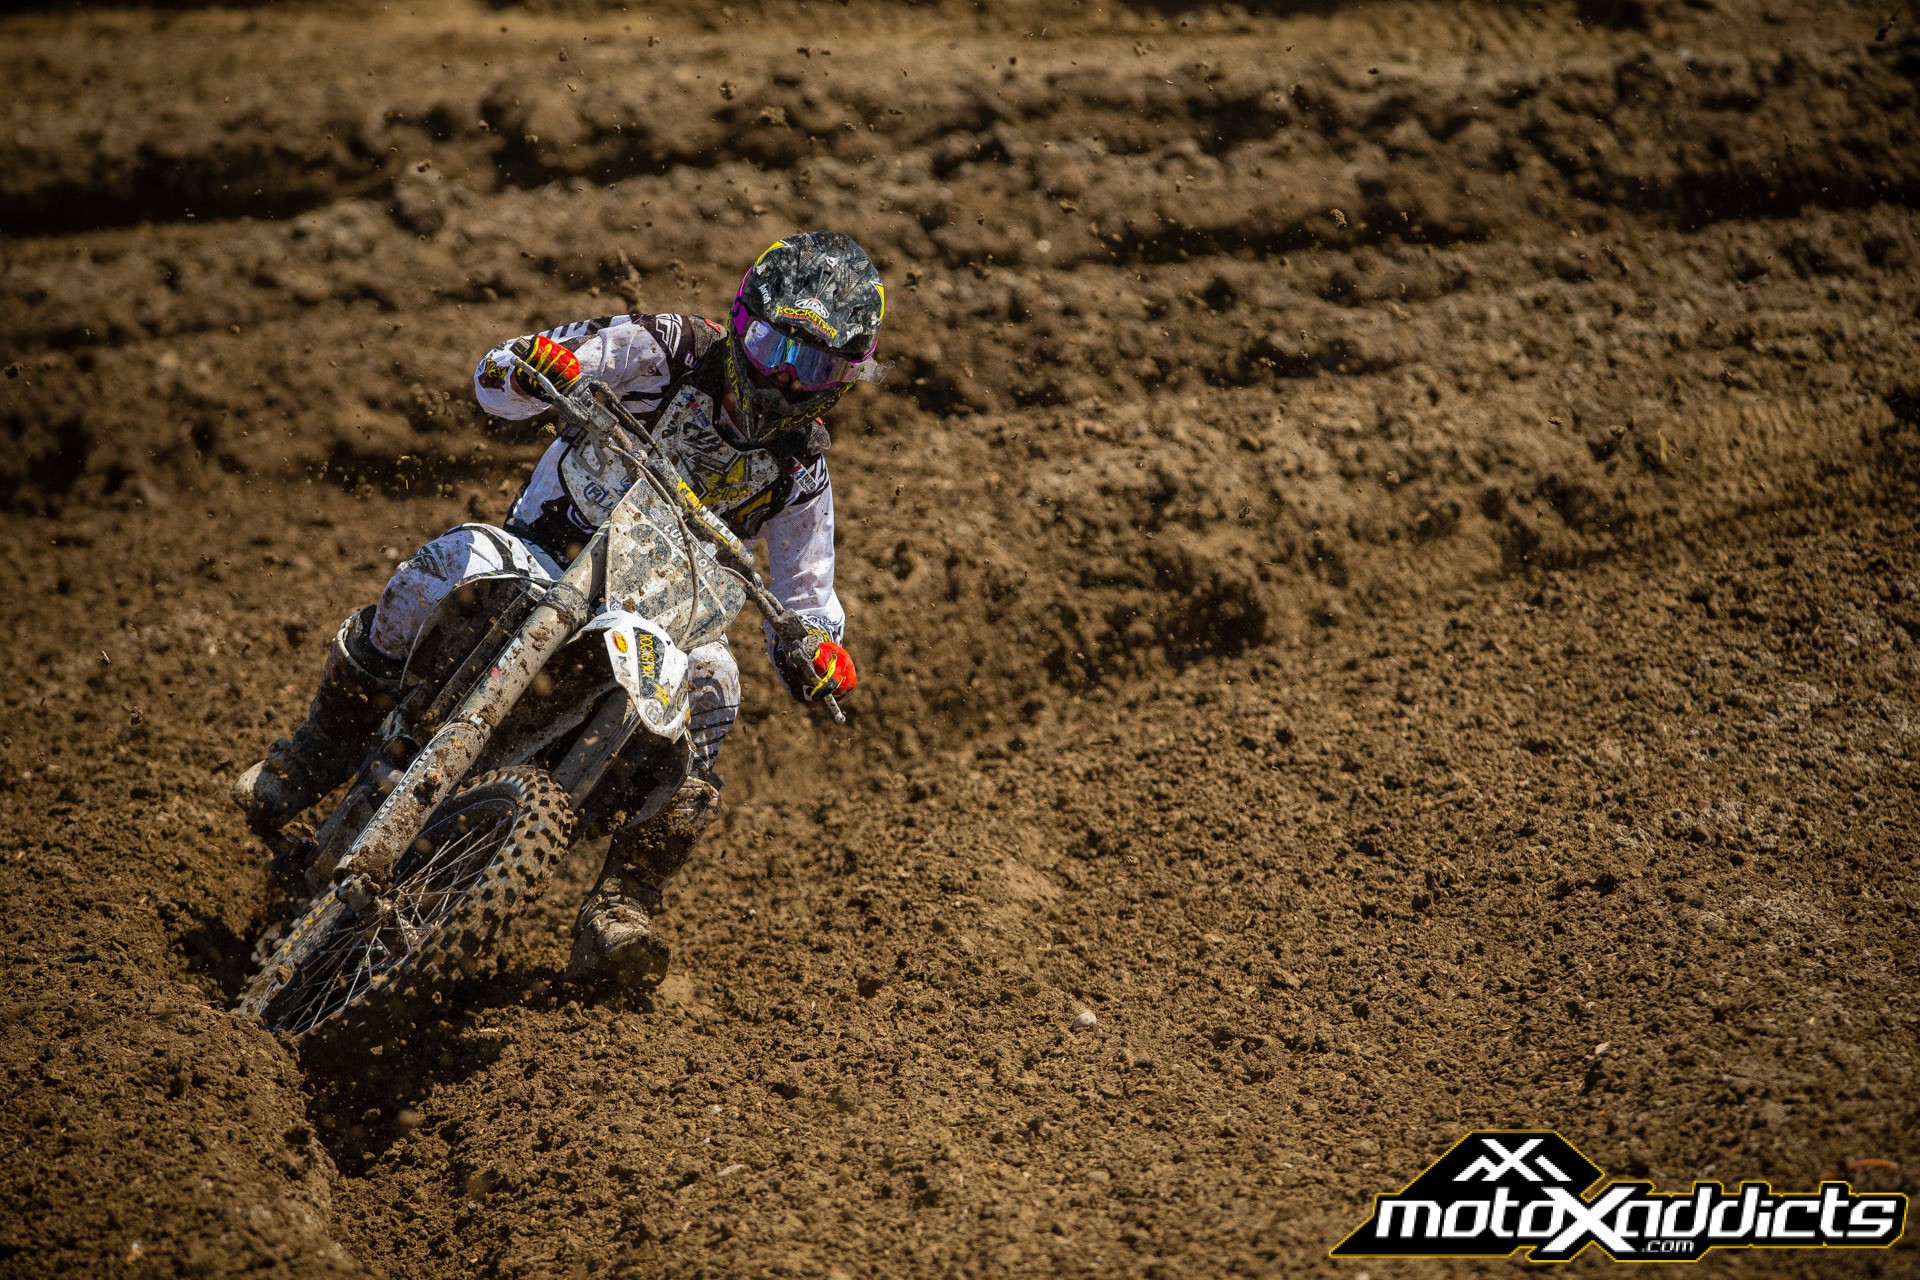 Christophe Pourcel will try to improve on his fifth place 450MX Championship standings from 2015. Photo by: Hoppenworld